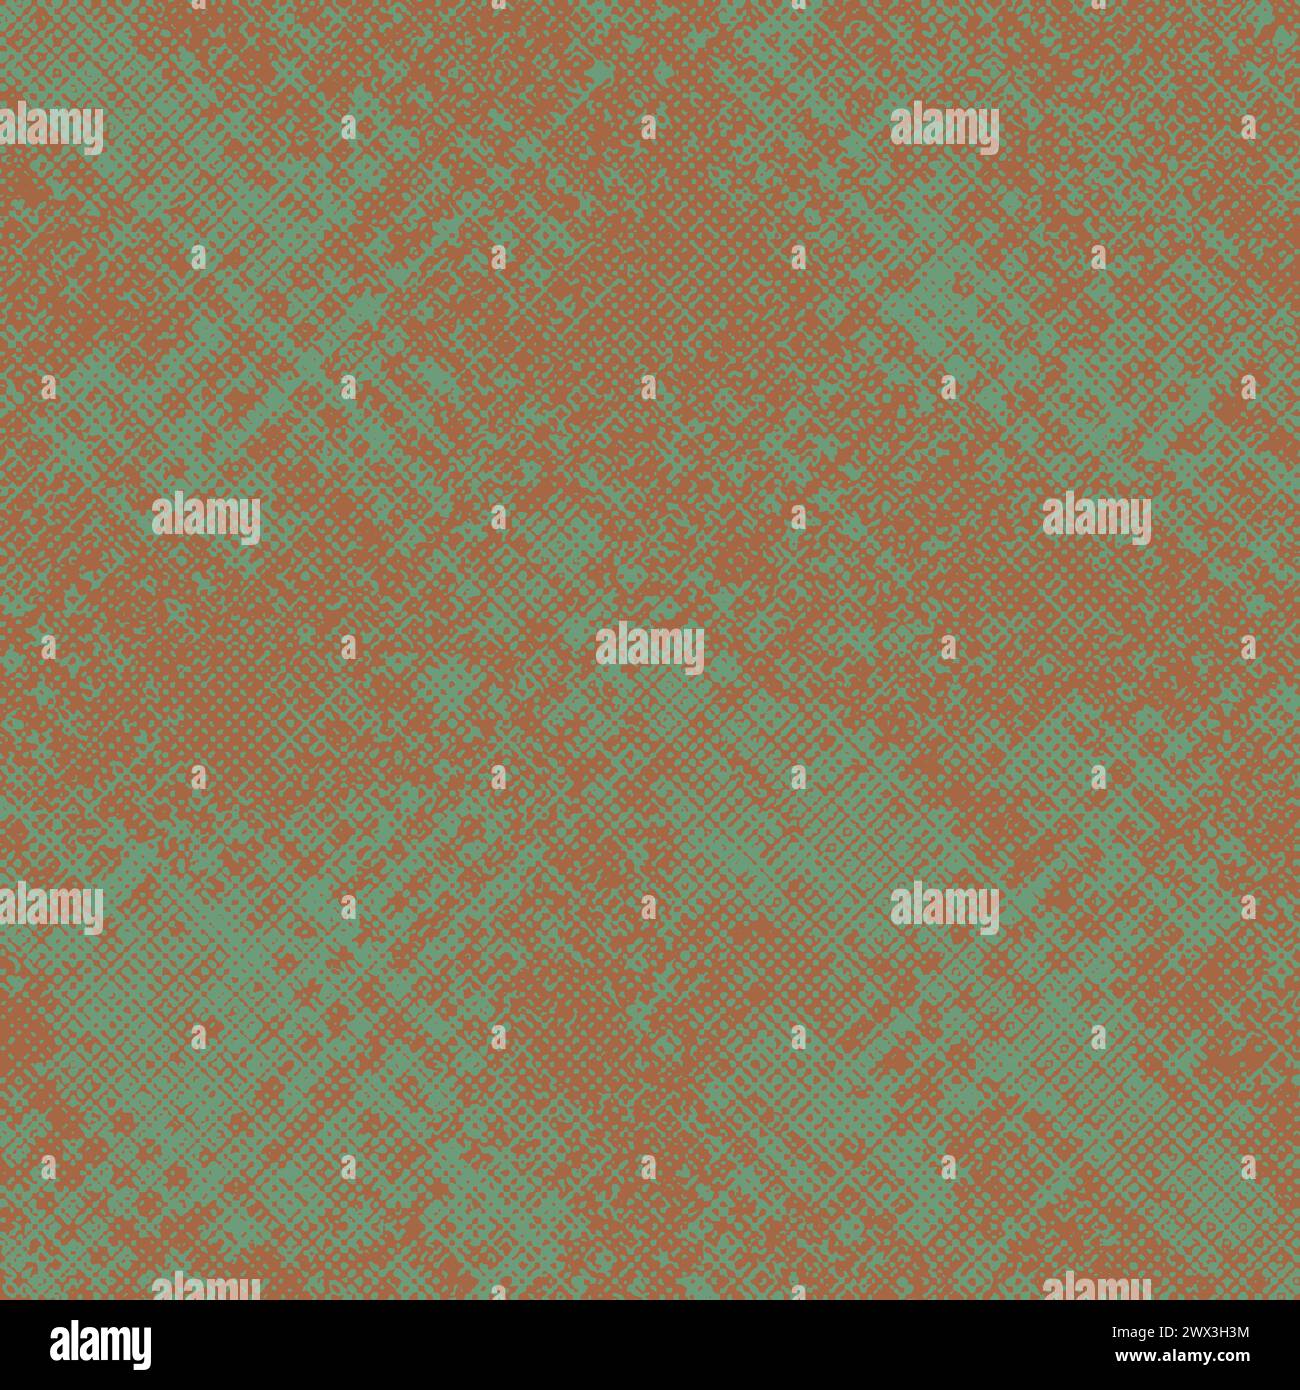 An abstract halftone grunge texture background image. Stock Photo